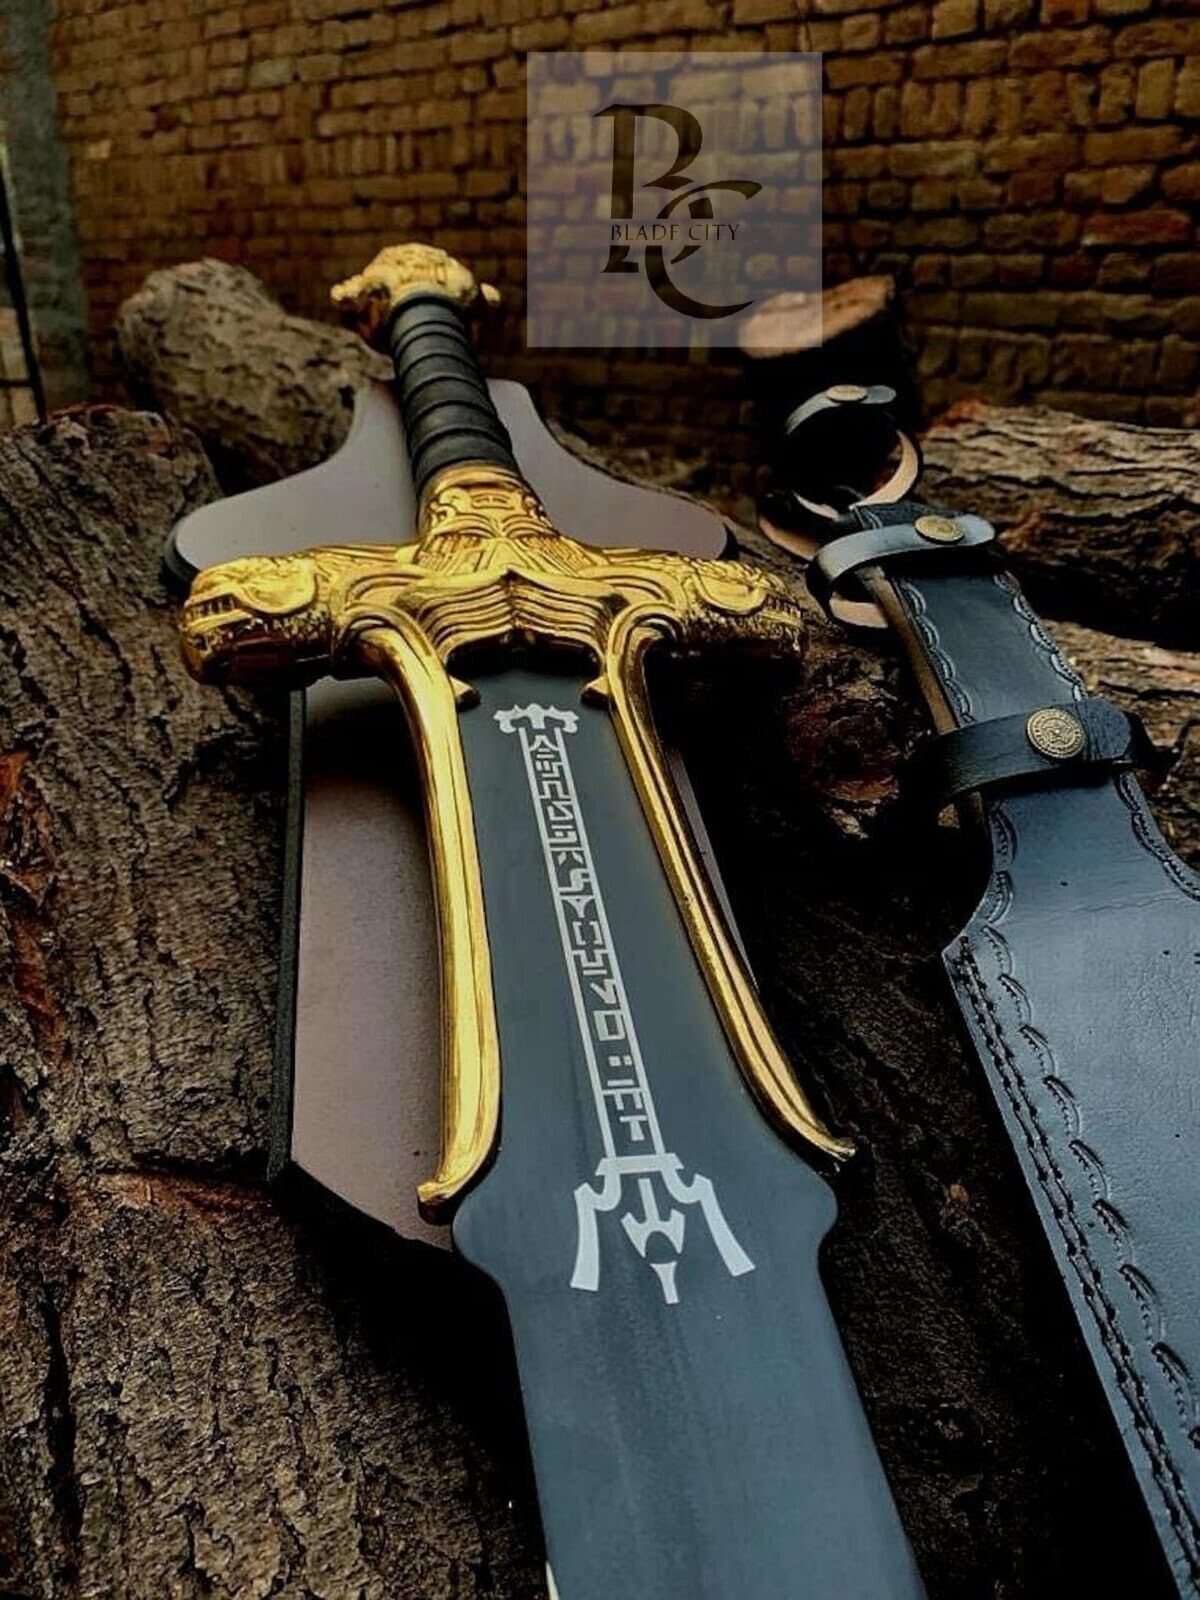 Conan The Barbarian Sword Atlantean Gold Edition With Leather & Wall Mount